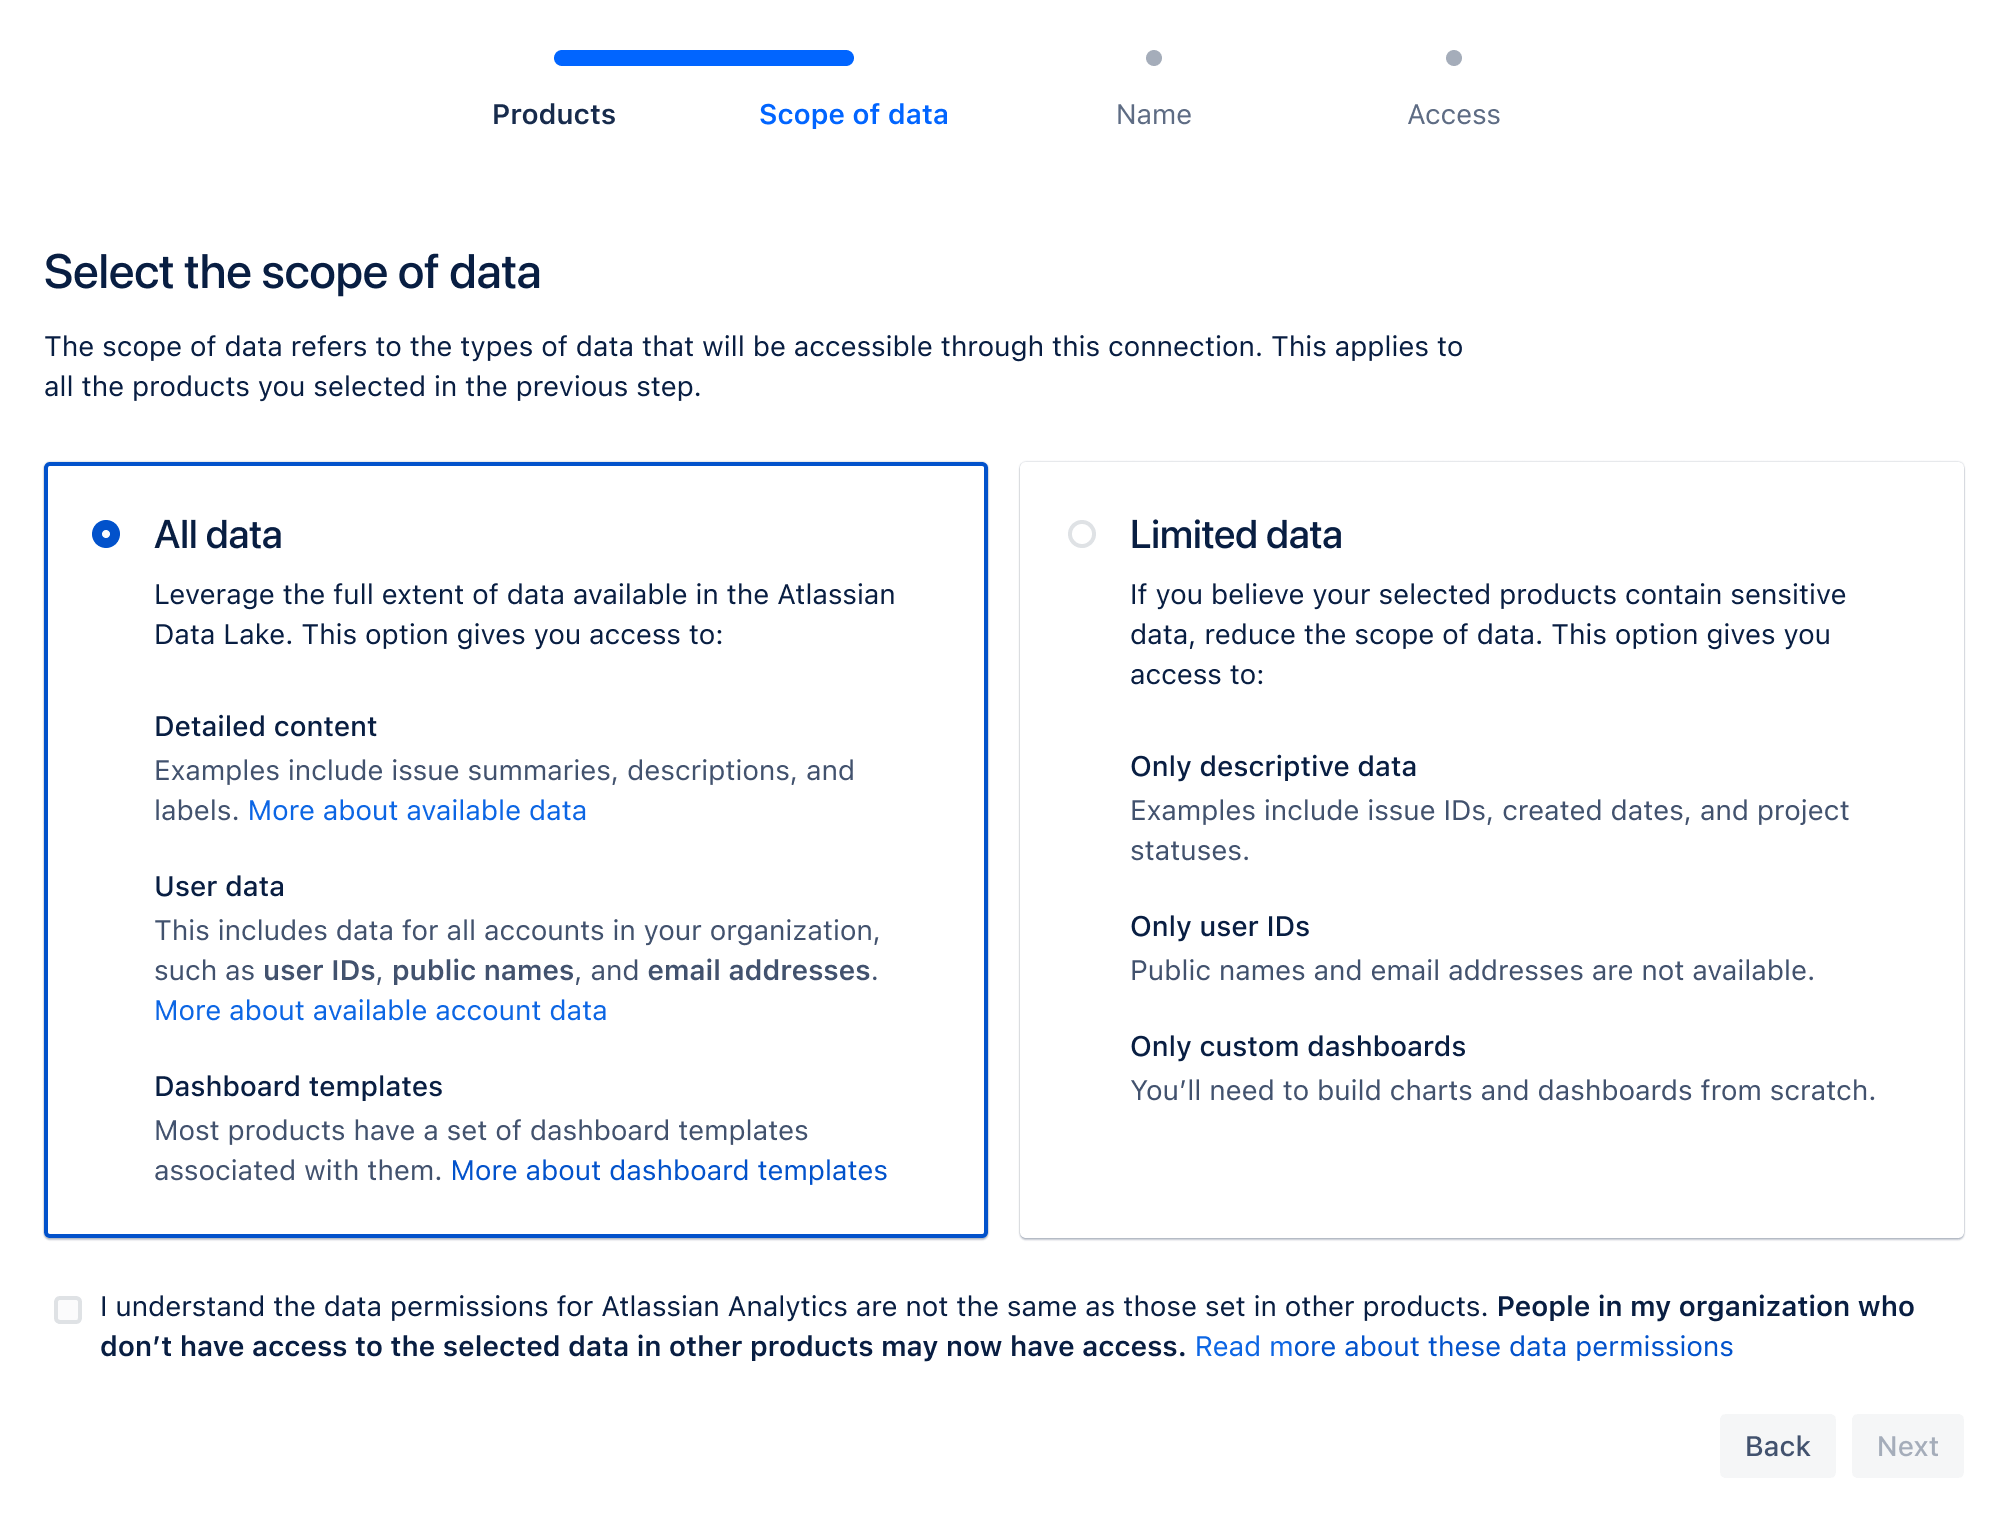 A screenshot shows how users can select all data or limited data from Atlassian Data Lake when connecting to Atlassian Analytics.